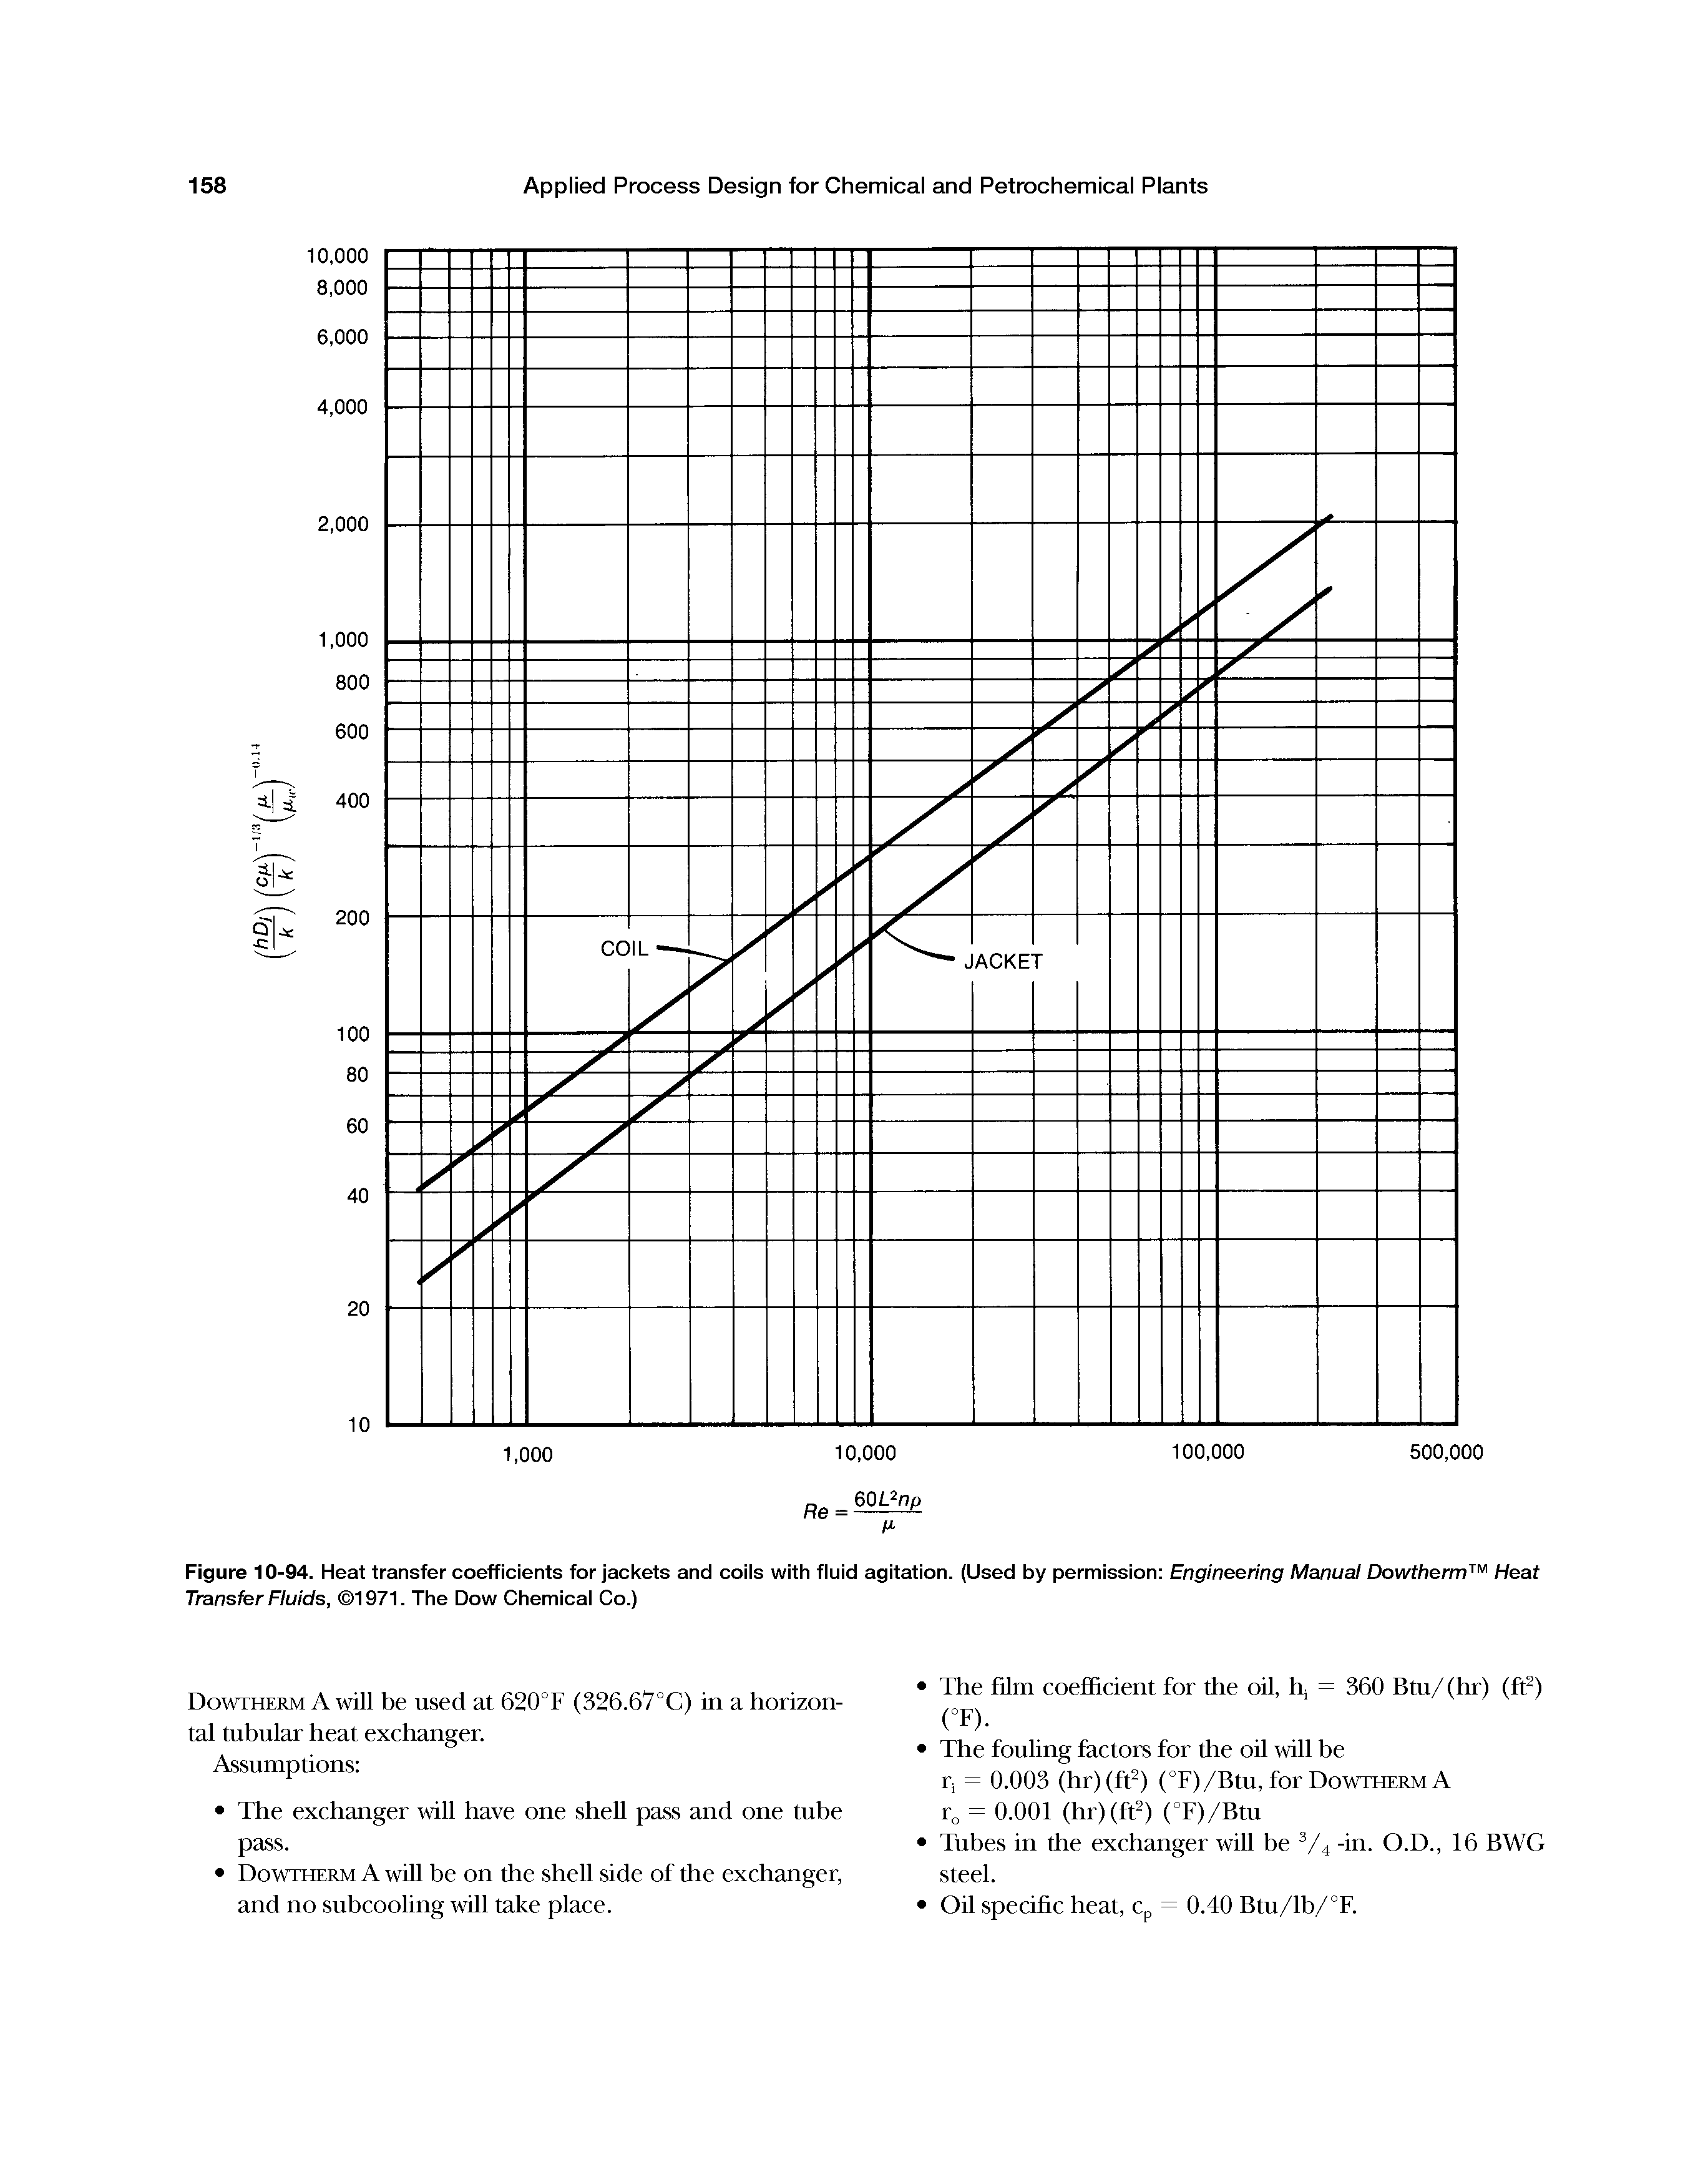 Figure 10-94. Heat transfer coefficients for jackets and coils with fluid agitation. (Used by permission Engineering Manual Dowtherm " Heat Transfer Fluids, 1971. The Dow Chemical Co.)...